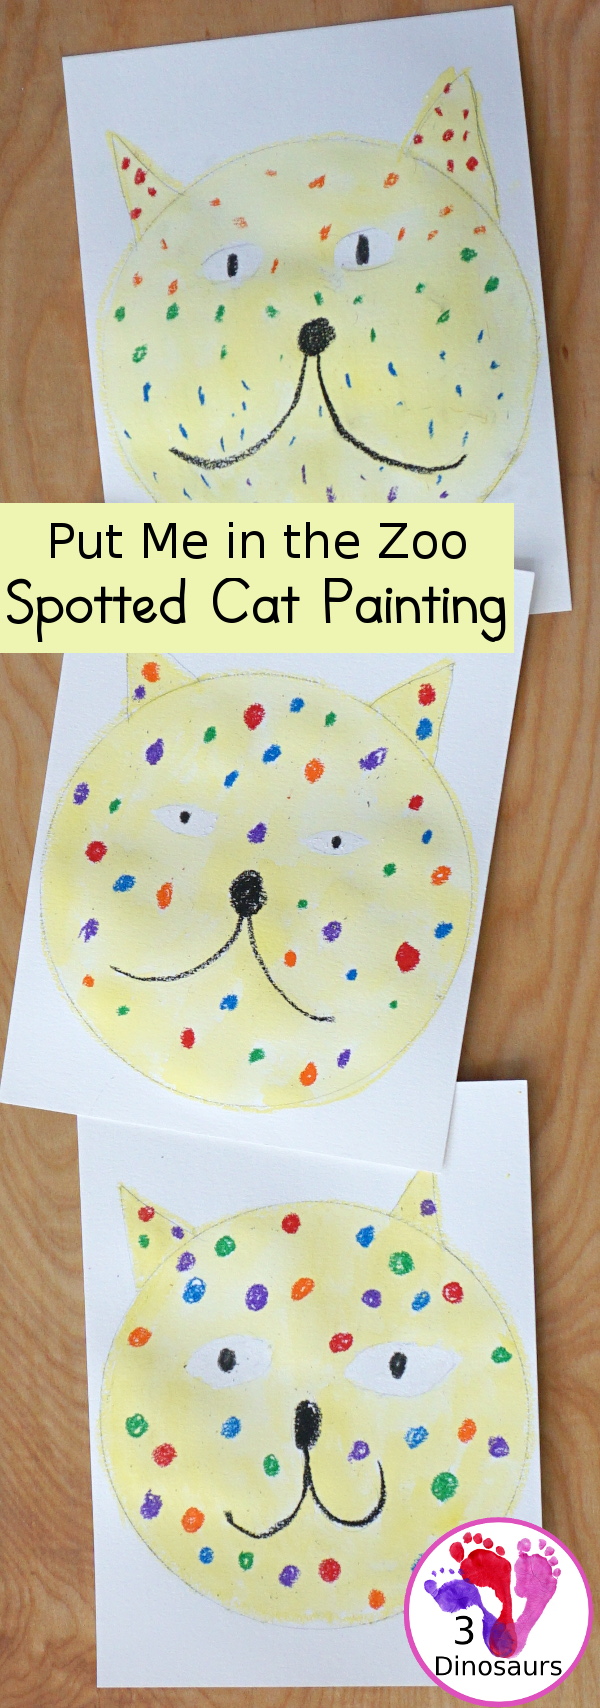 Put Me in the Zoo: Spotted Cat Painting with watercolors and oil pastels - 3Dinosaurs.com